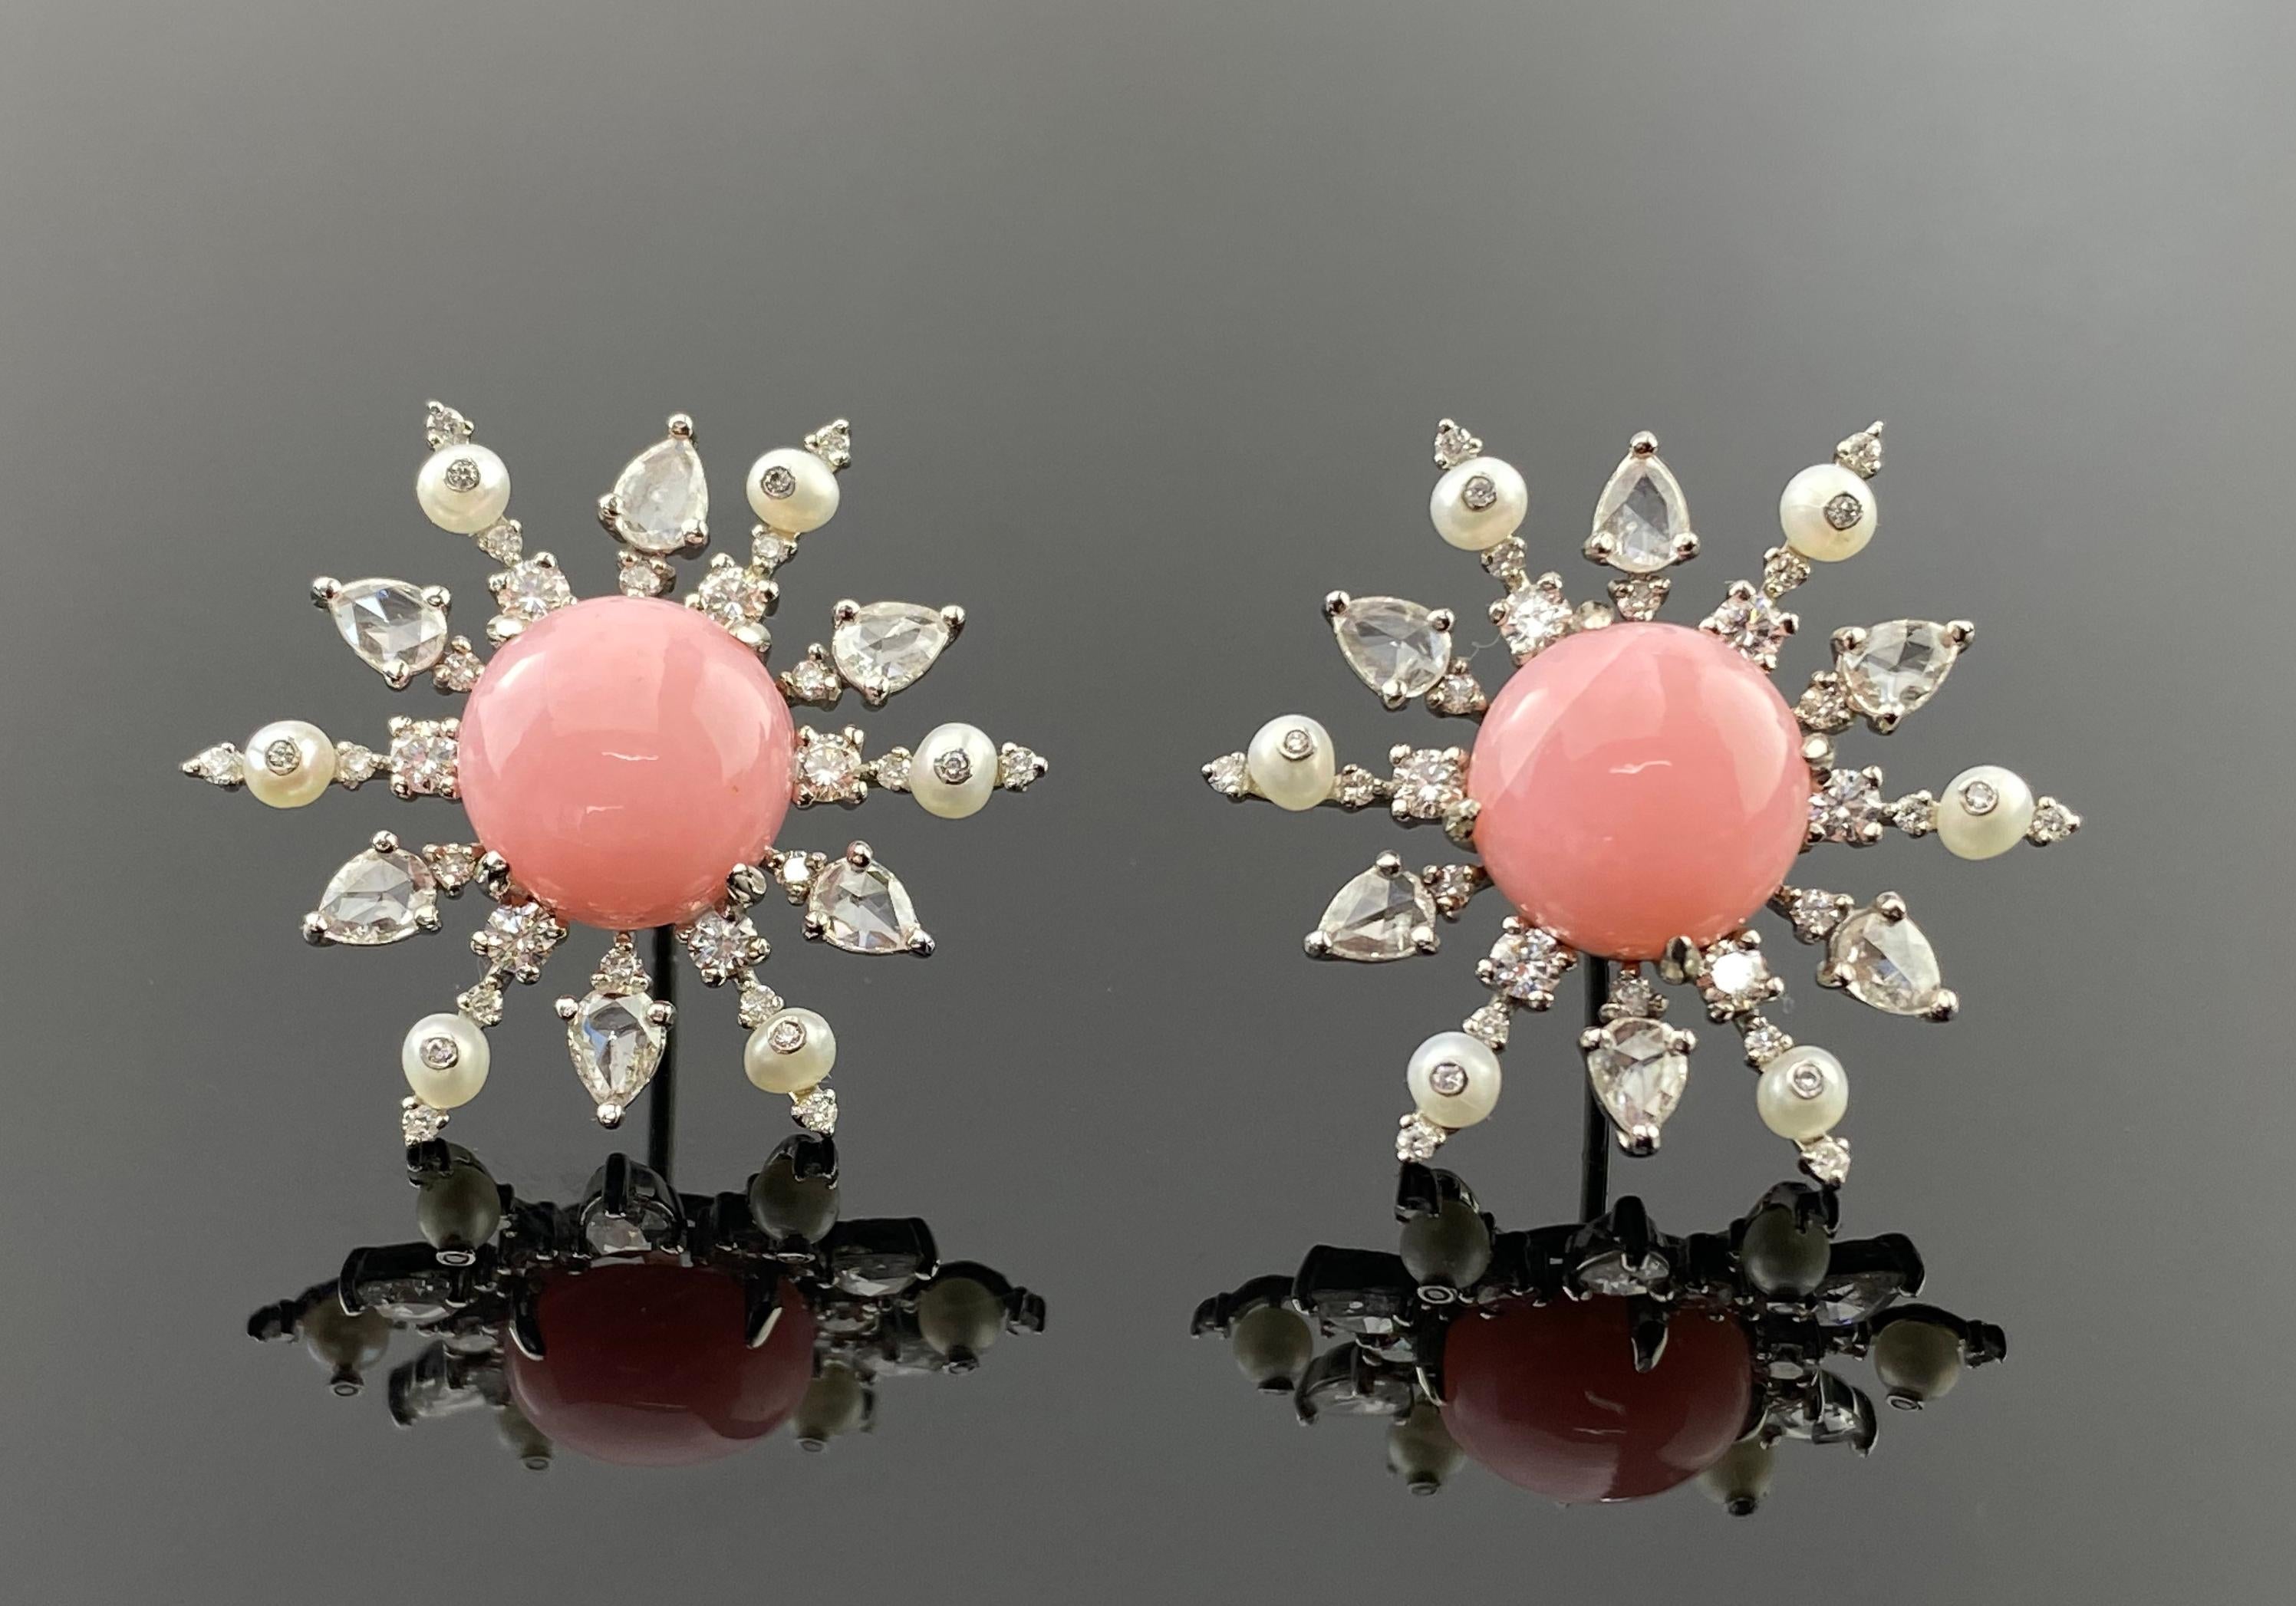 The soft, blush-hued Pink Opals exude a delicate charm, while the pearls add a touch of timeless sophistication. Brilliant and Rose cut White Diamonds gracefully frame the ensemble, enhancing the overall allure and making these earrings a versatile